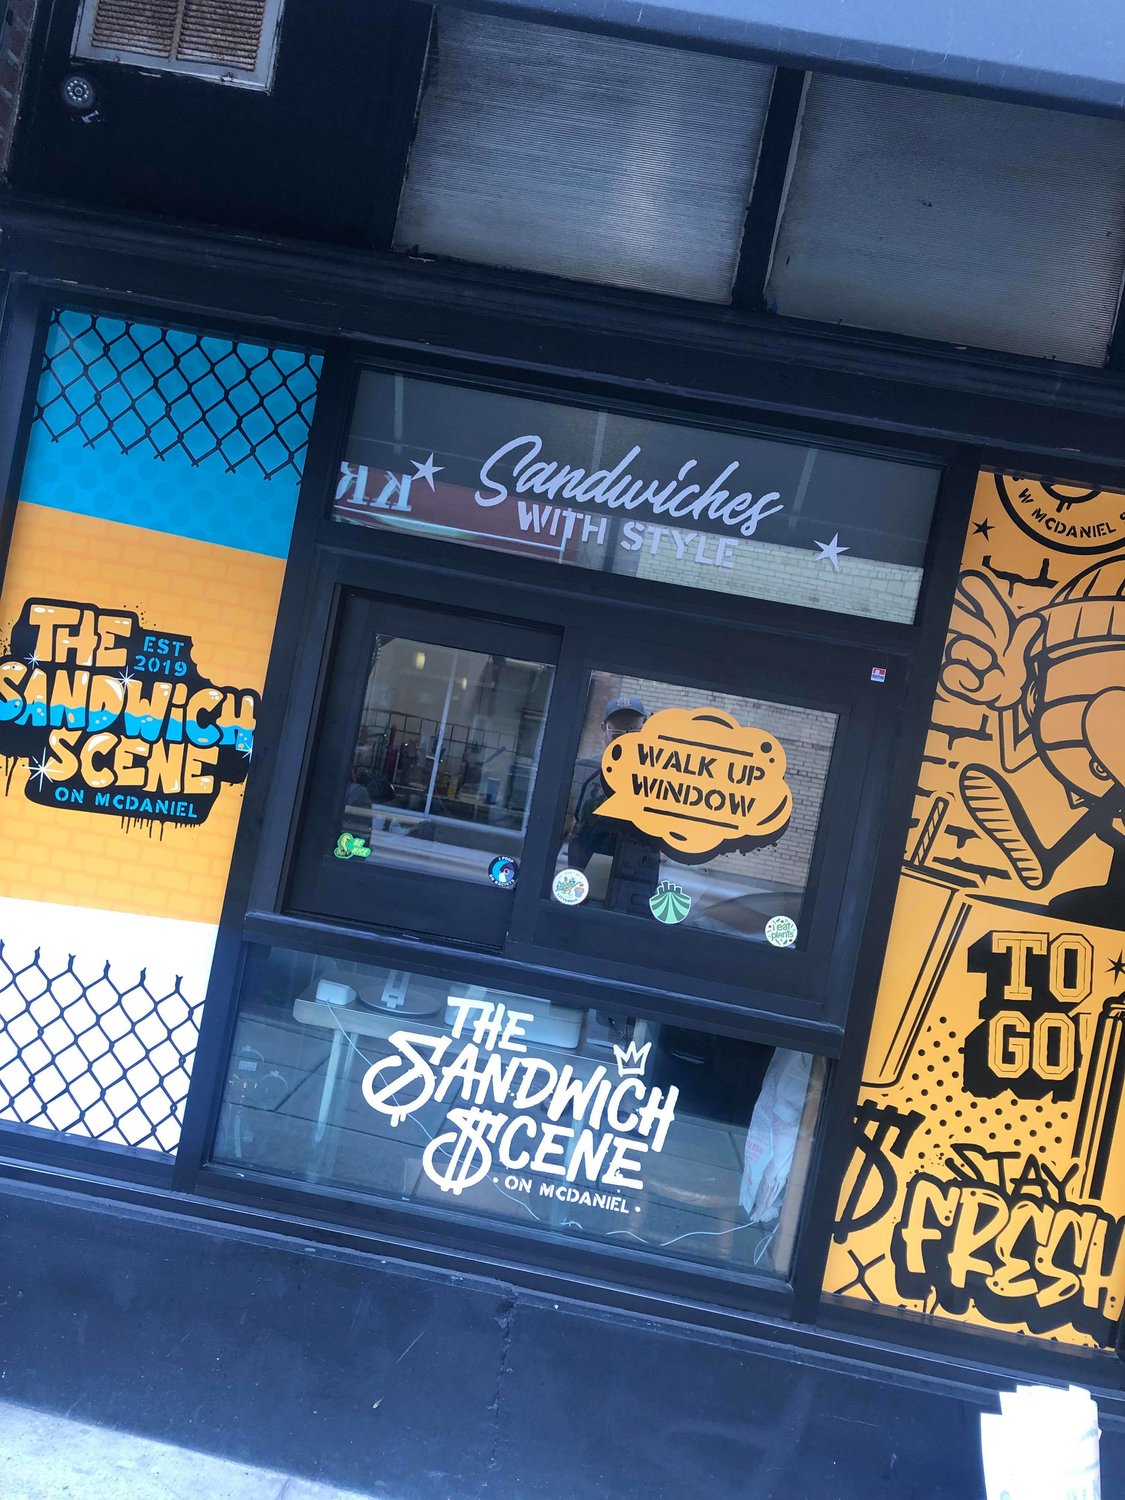 Graphics have been installed at the newly rebranded Sandwich Scene on McDaniel.